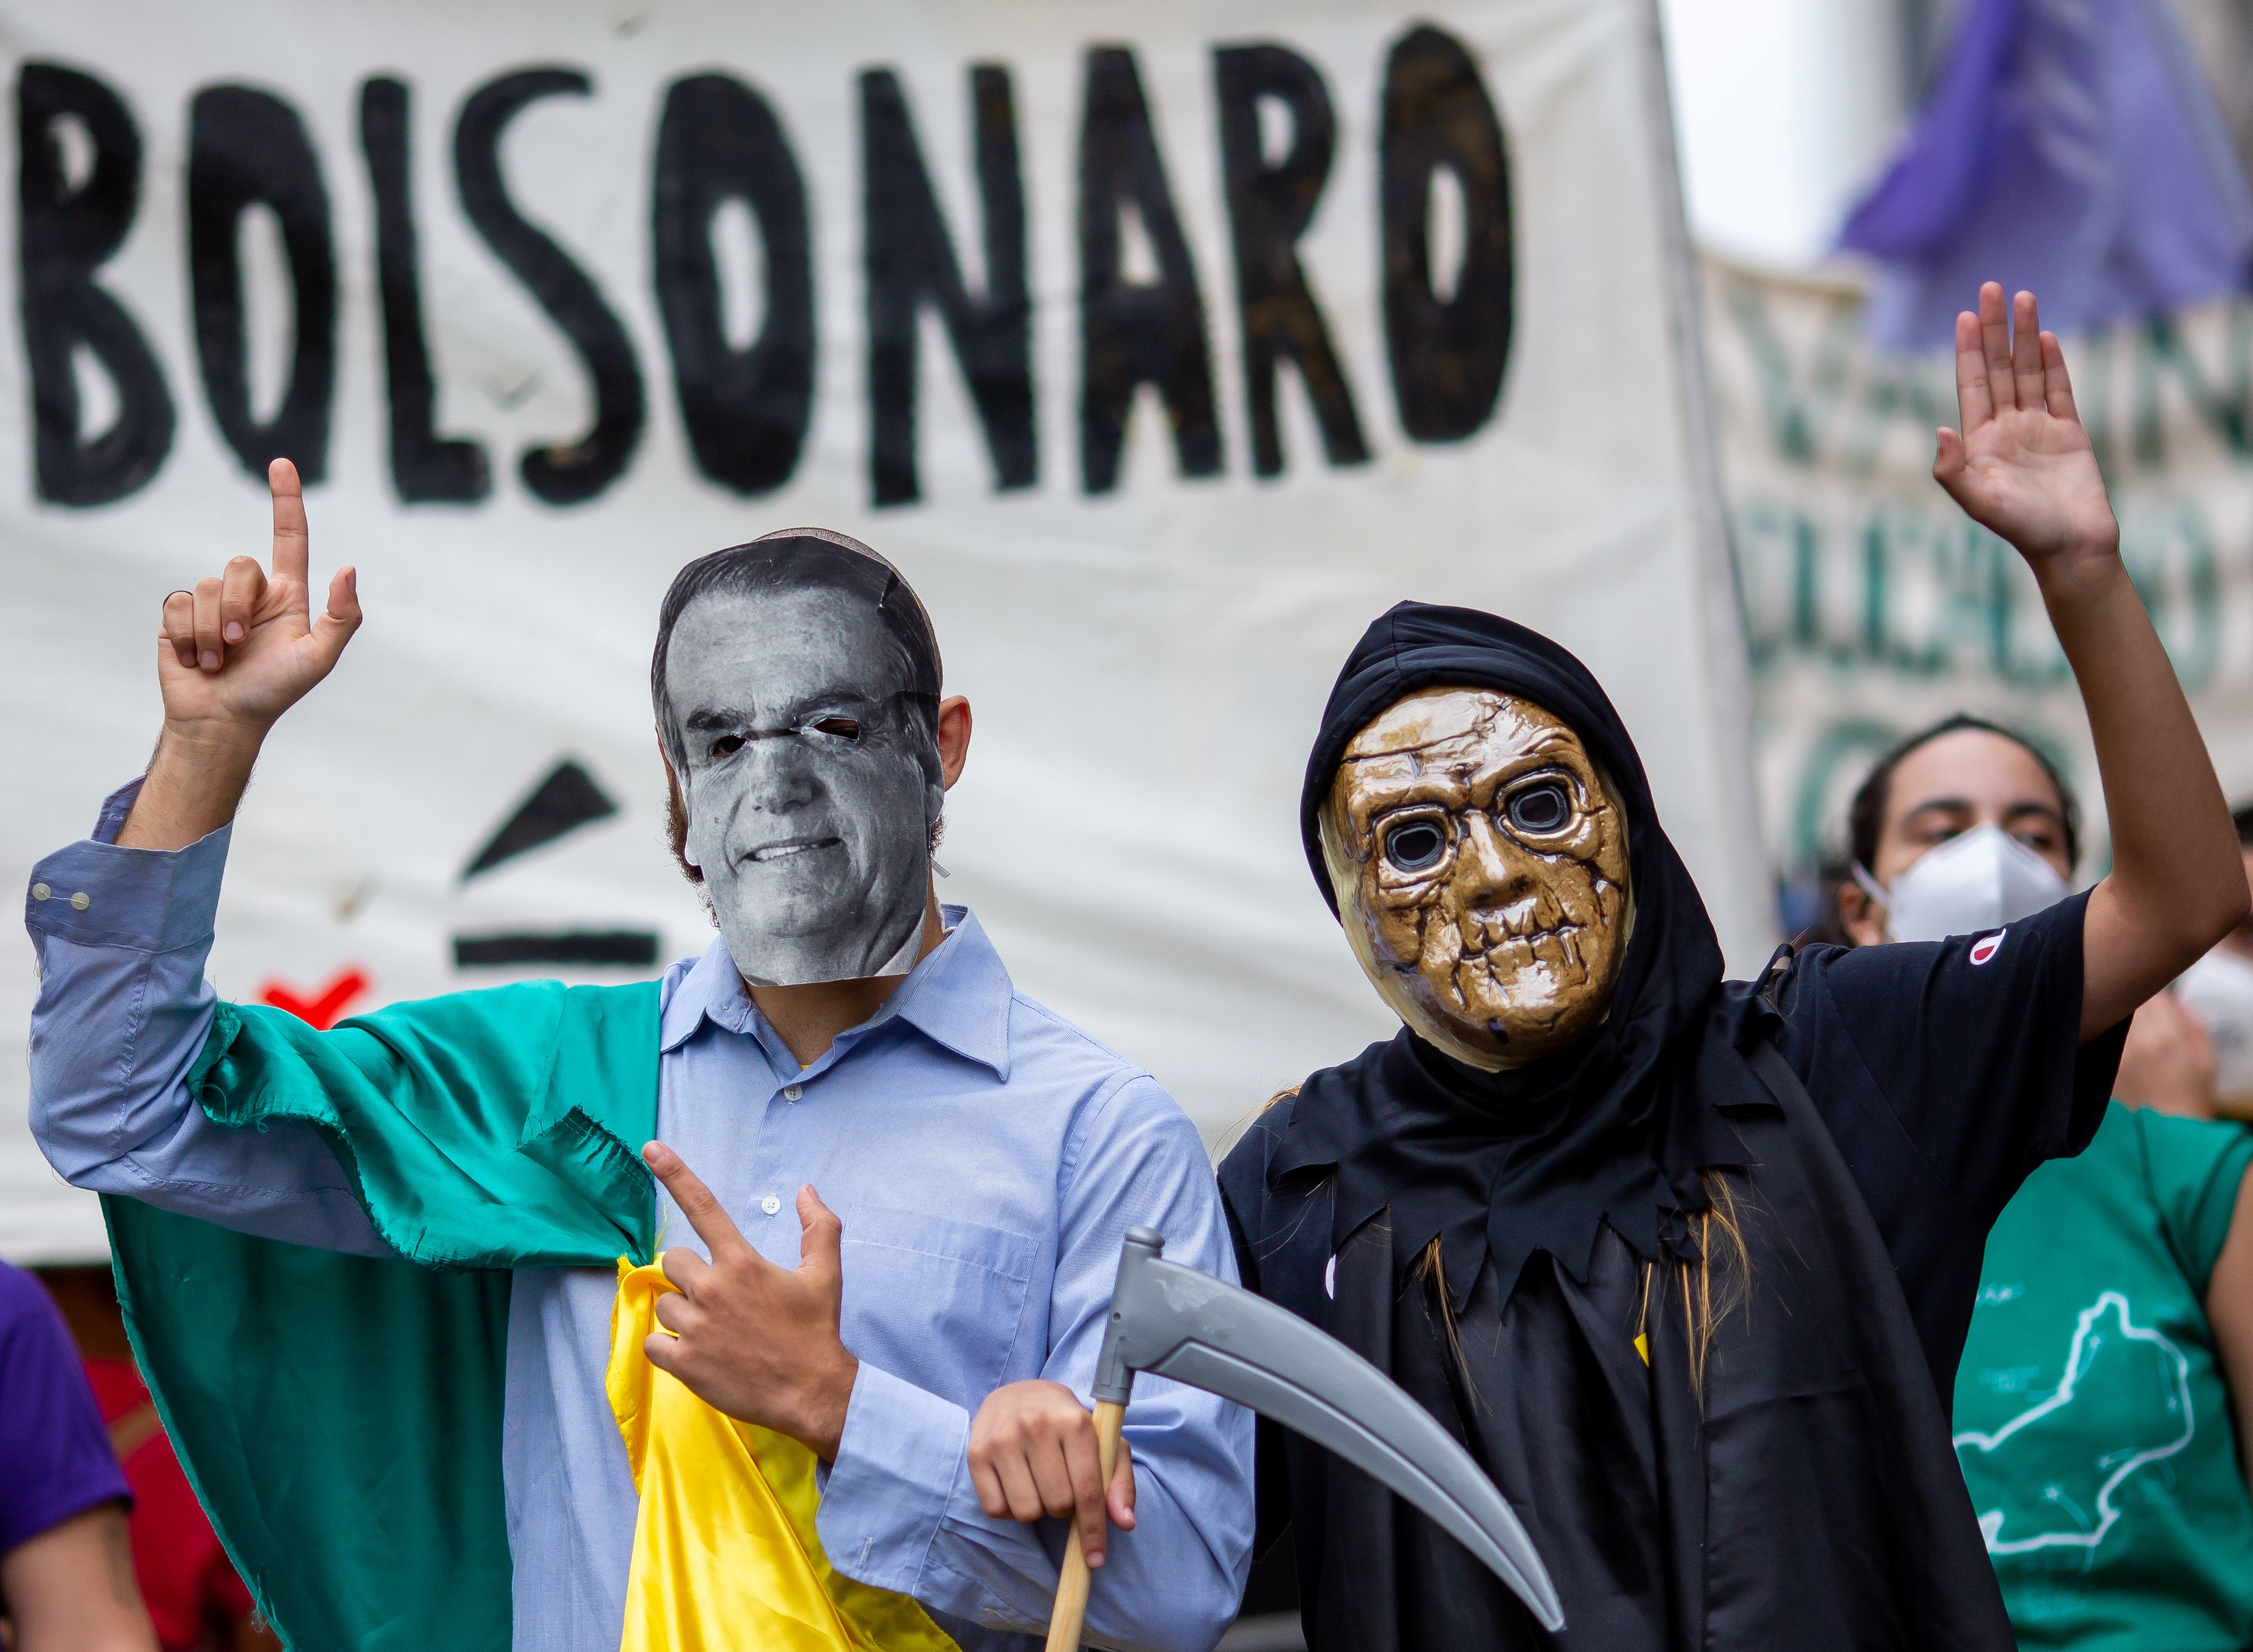 Demonstrators wear a costume depicting death and the picture of Jair Bolsonaro during a protest against Bolsonaro's administration on June 19, 2021 in Rio de Janeiro, Brazil. 